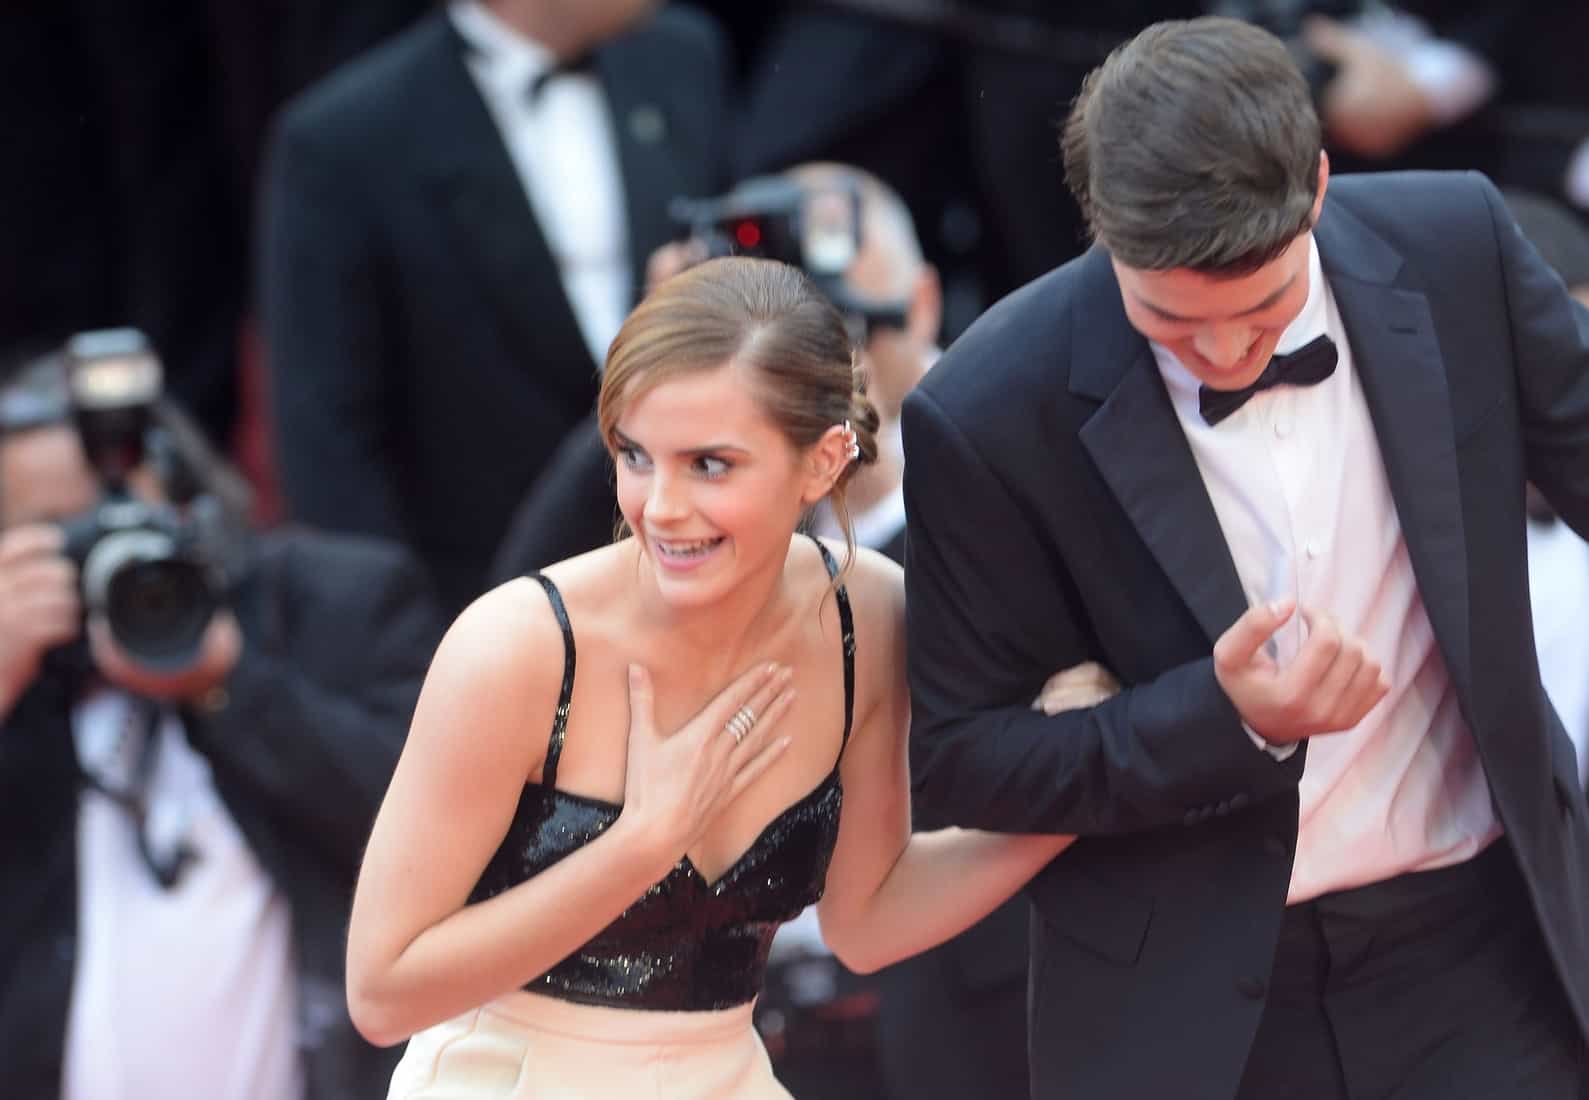 Emma Watson Wore a Daring Chanel Dress at The Bling Ring Premiere in Cannes